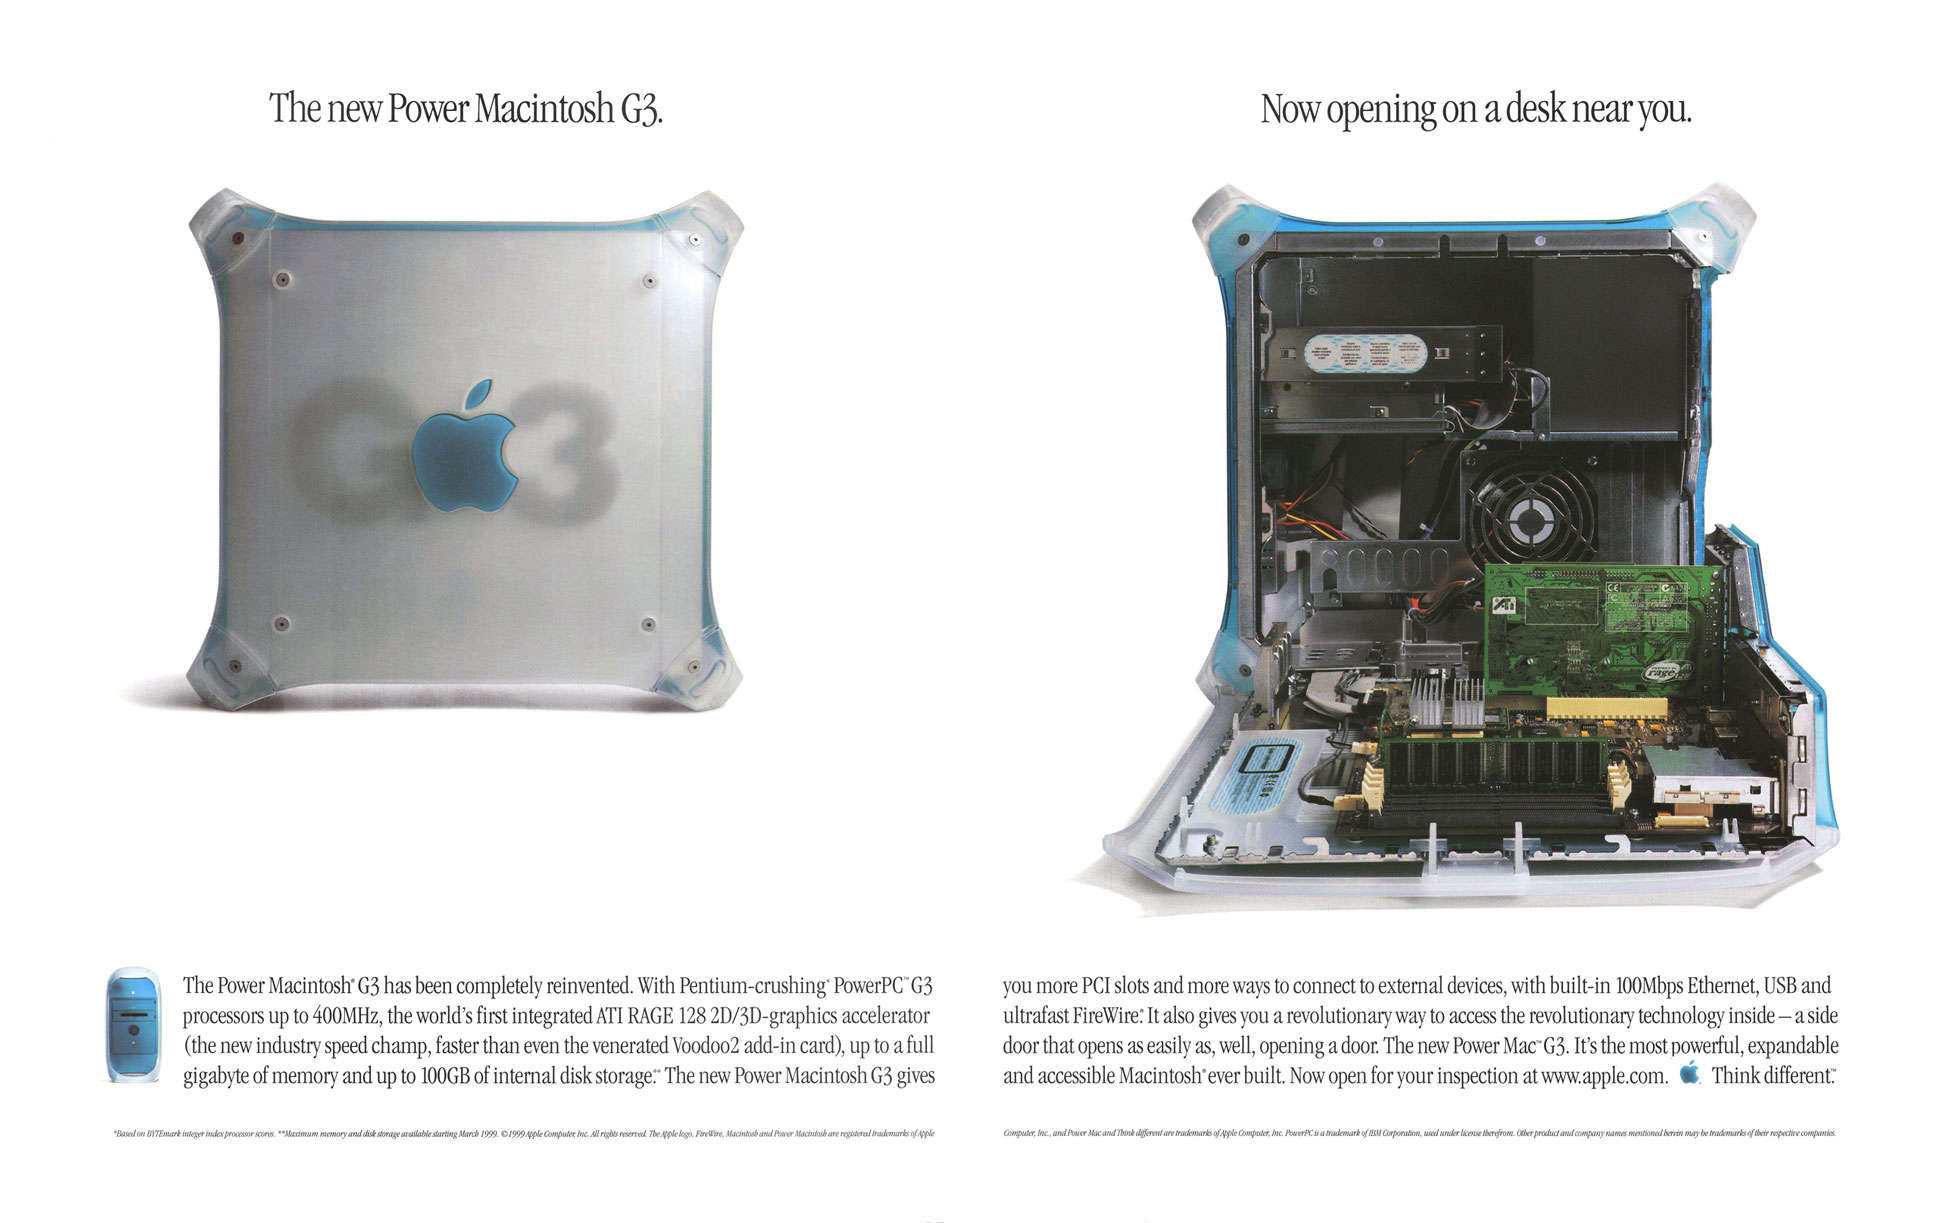 One of the Power Mac G3's original ads shows the computer from the side, both open (to show its internal components) and closed.